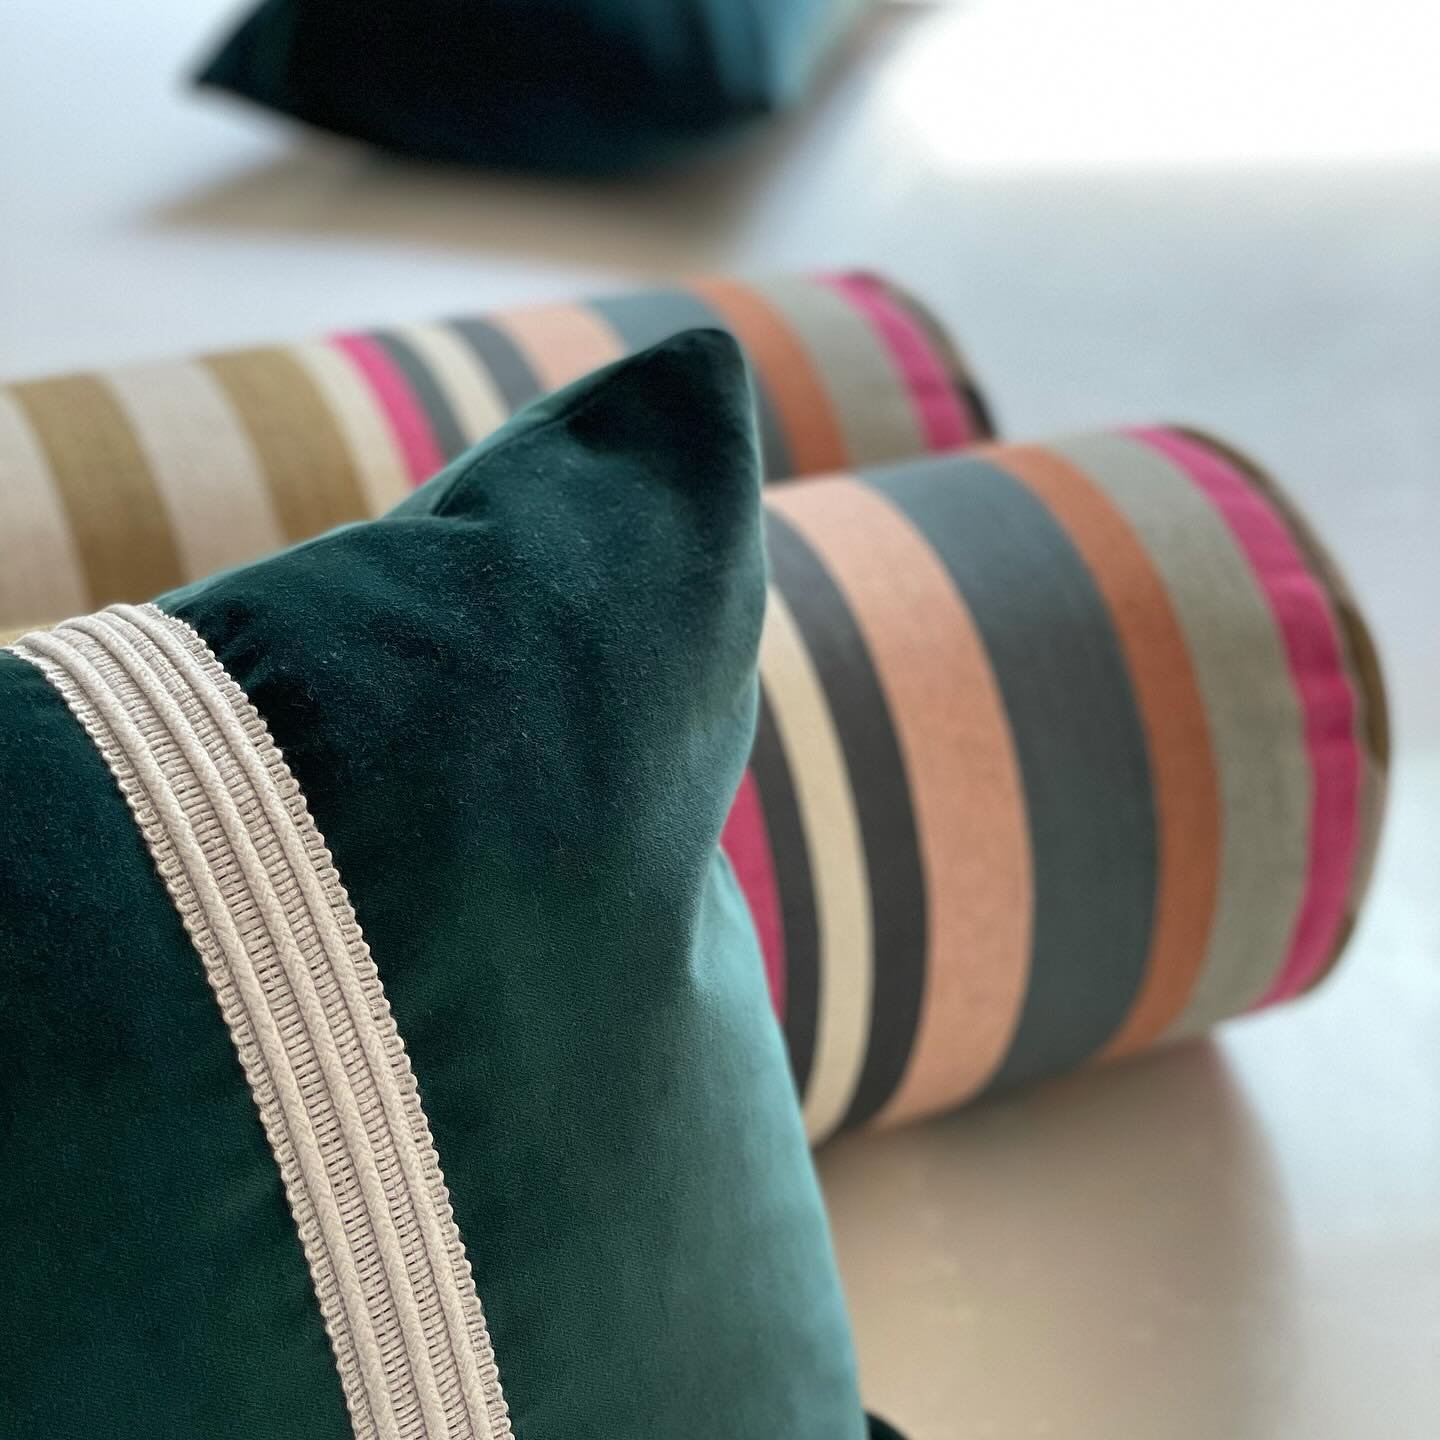 Dreamy design details and a bespoke pillow story is our fort&eacute;.

Working with beautiful fabrics and trims to create something special that reflects your personality, and elevates the ordinary to extraordinary.

#curaticollectioncushions #thecur